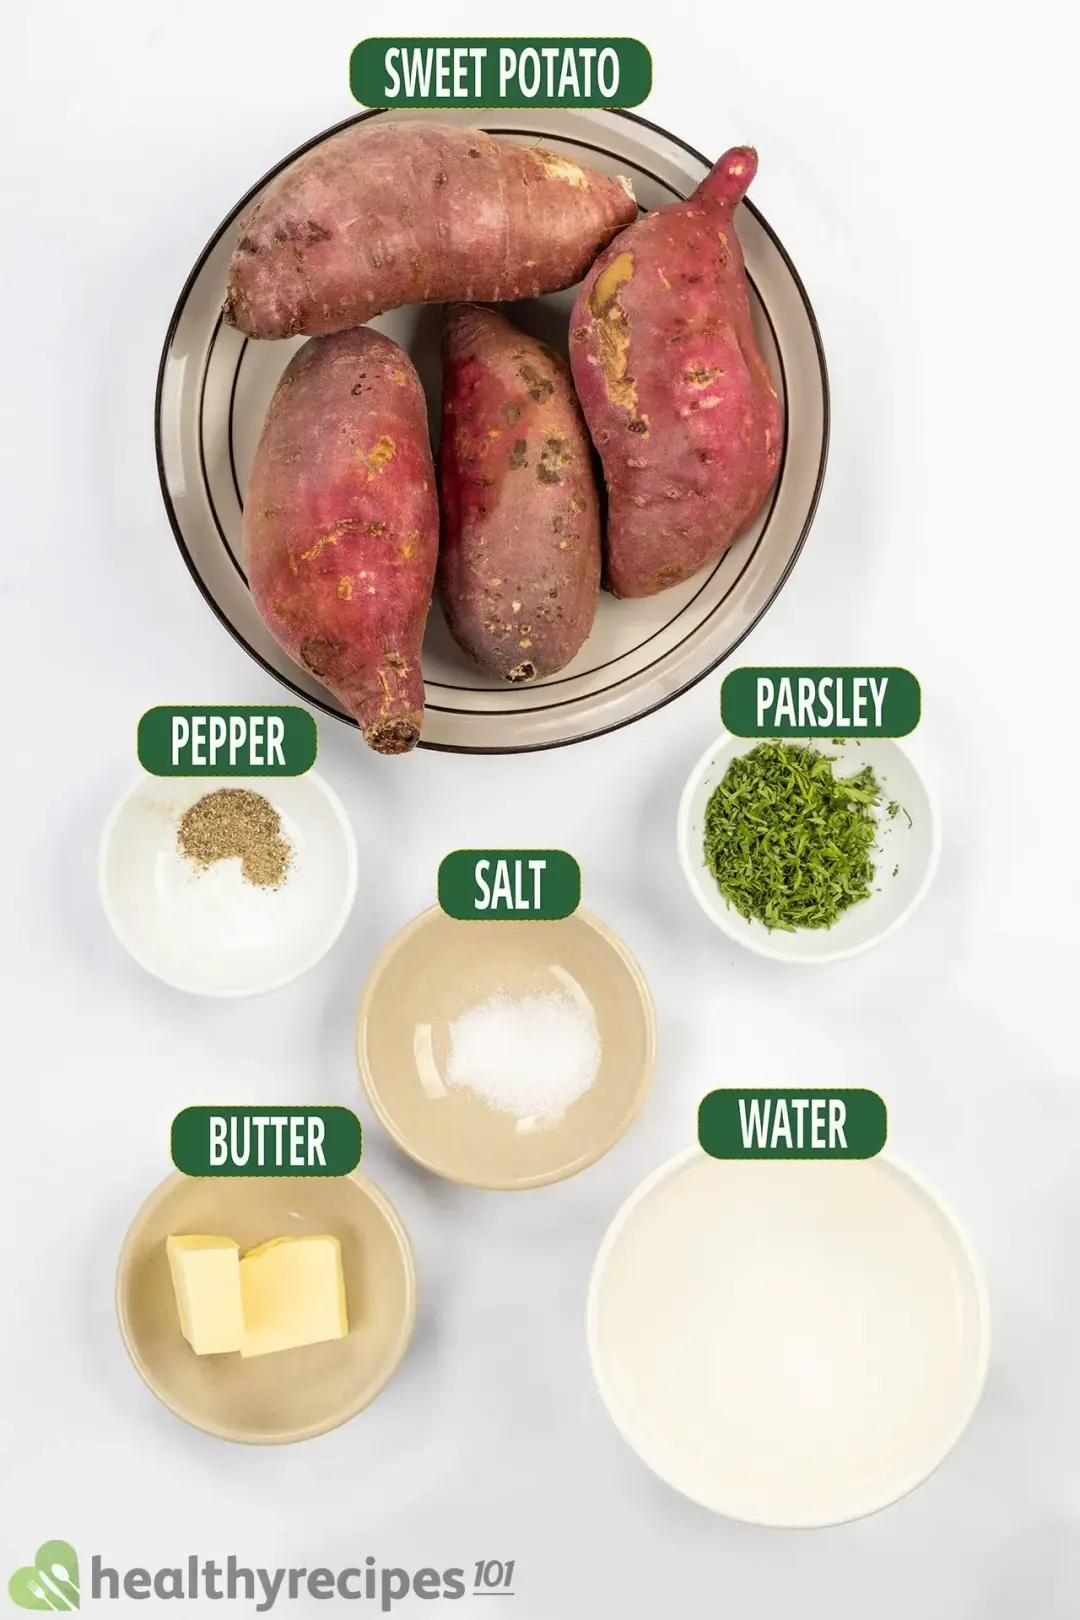 Ingredients for Our Instant Pot Sweet Potato Recipe